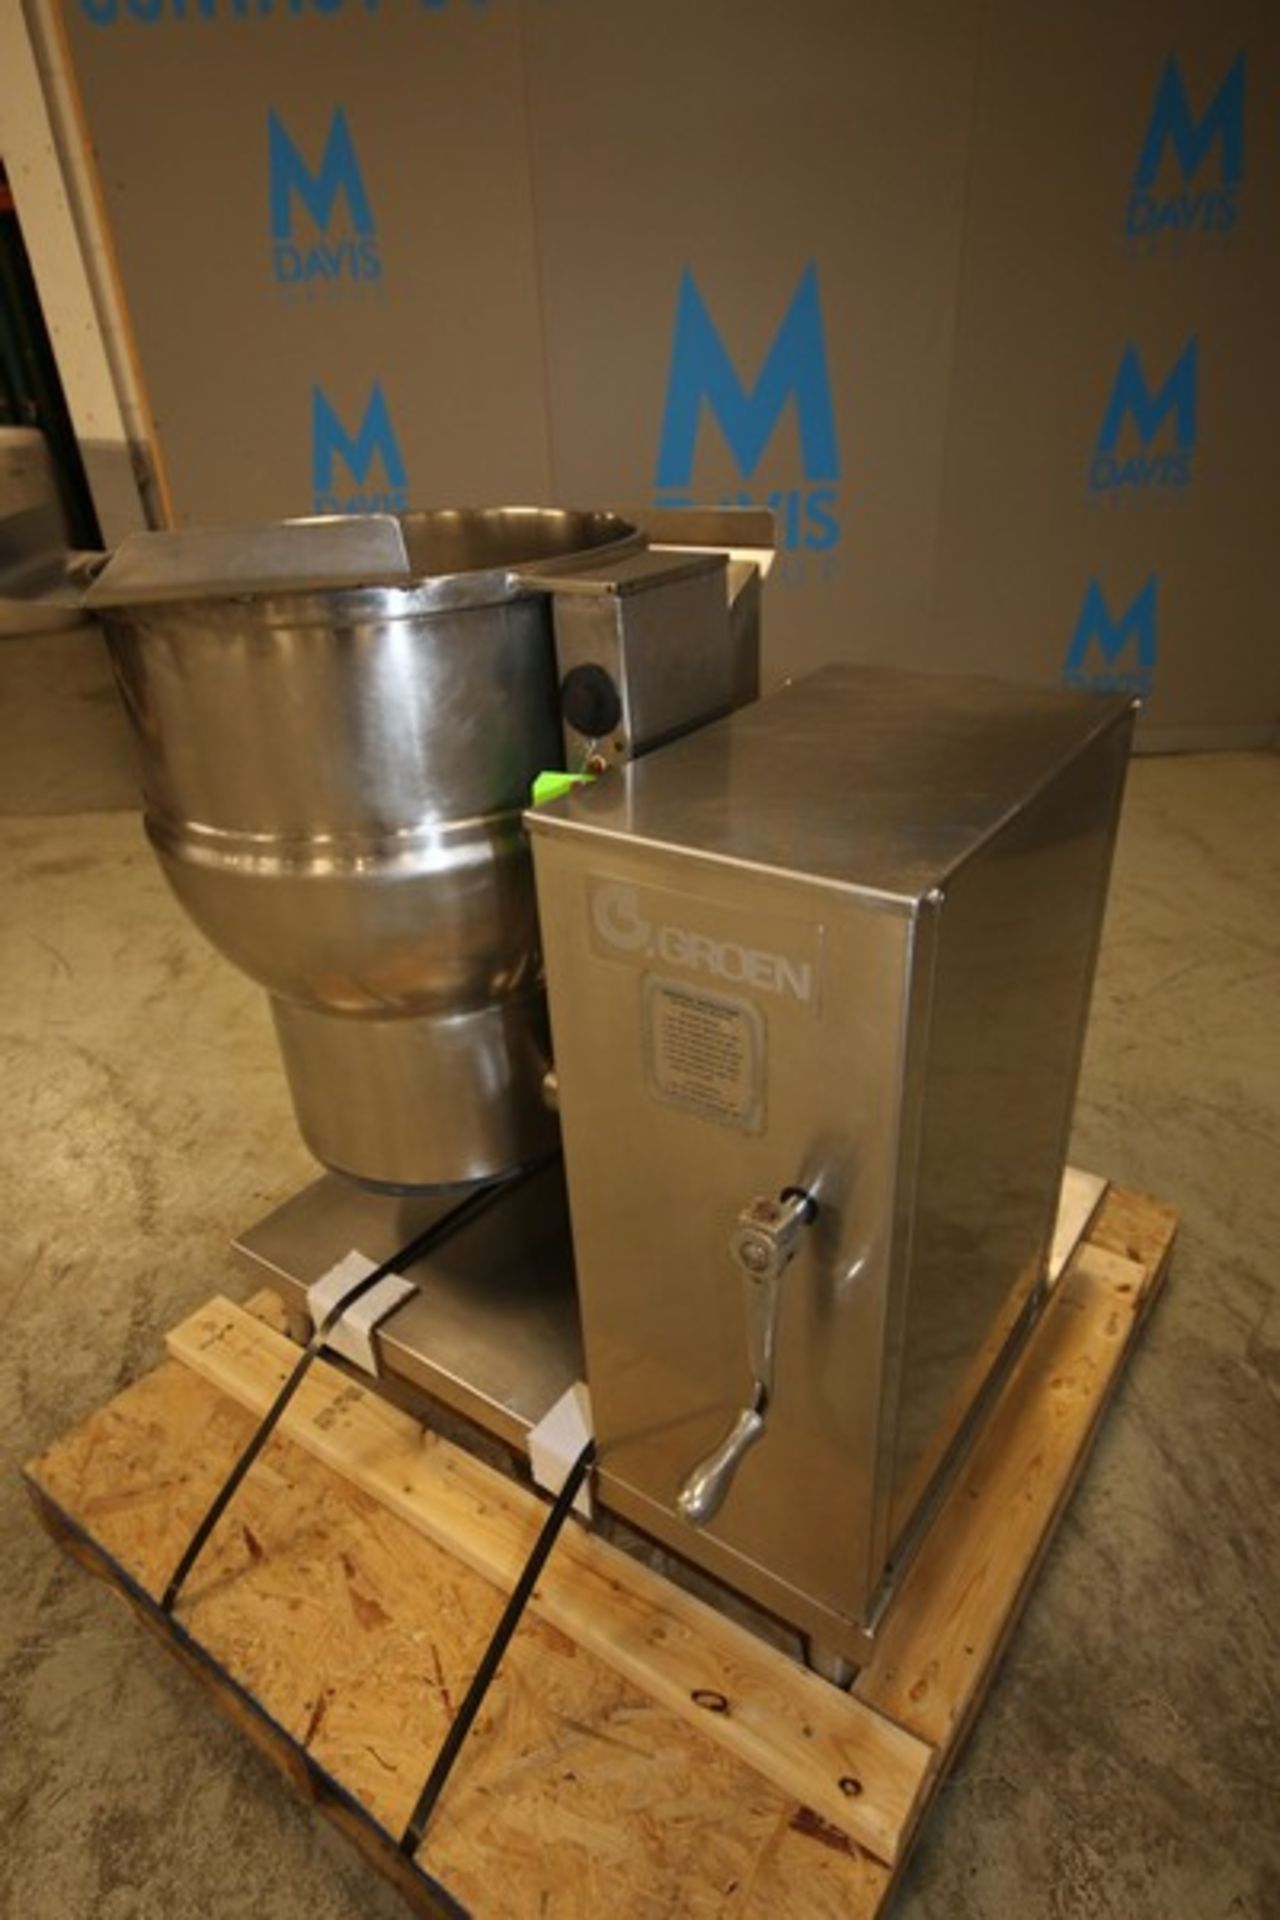 Groen 20 Gallon Jacketed S/S Tilt Kettle, Model DH-20, SN 124923, 115V, Propane Gas, Max W.P. 50 psi - Image 3 of 8